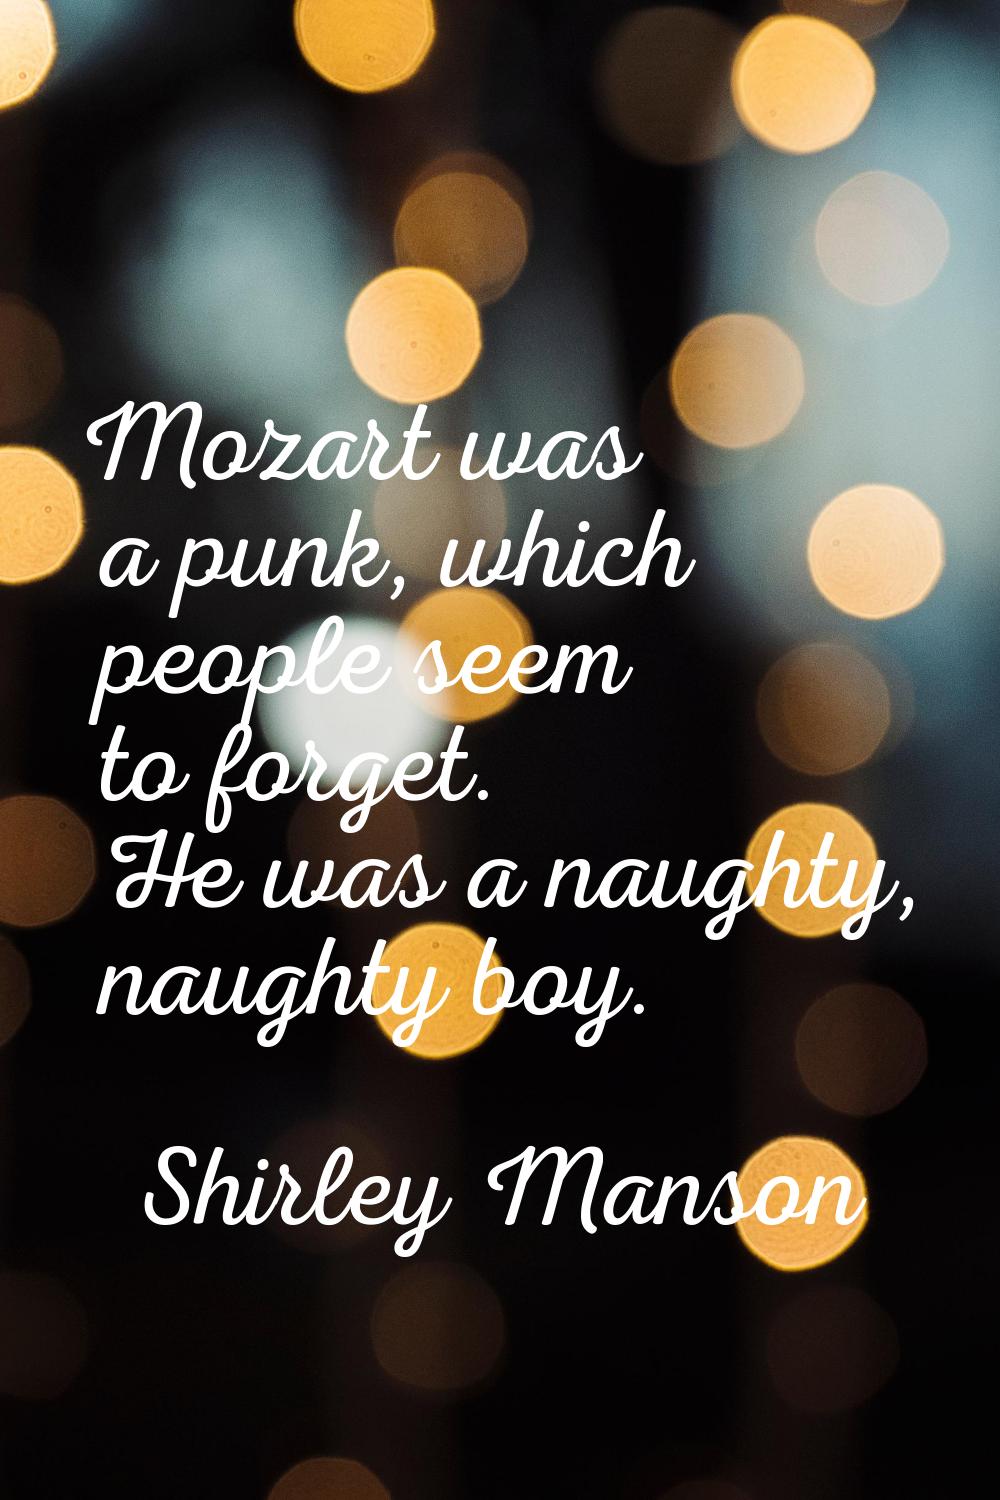 Mozart was a punk, which people seem to forget. He was a naughty, naughty boy.